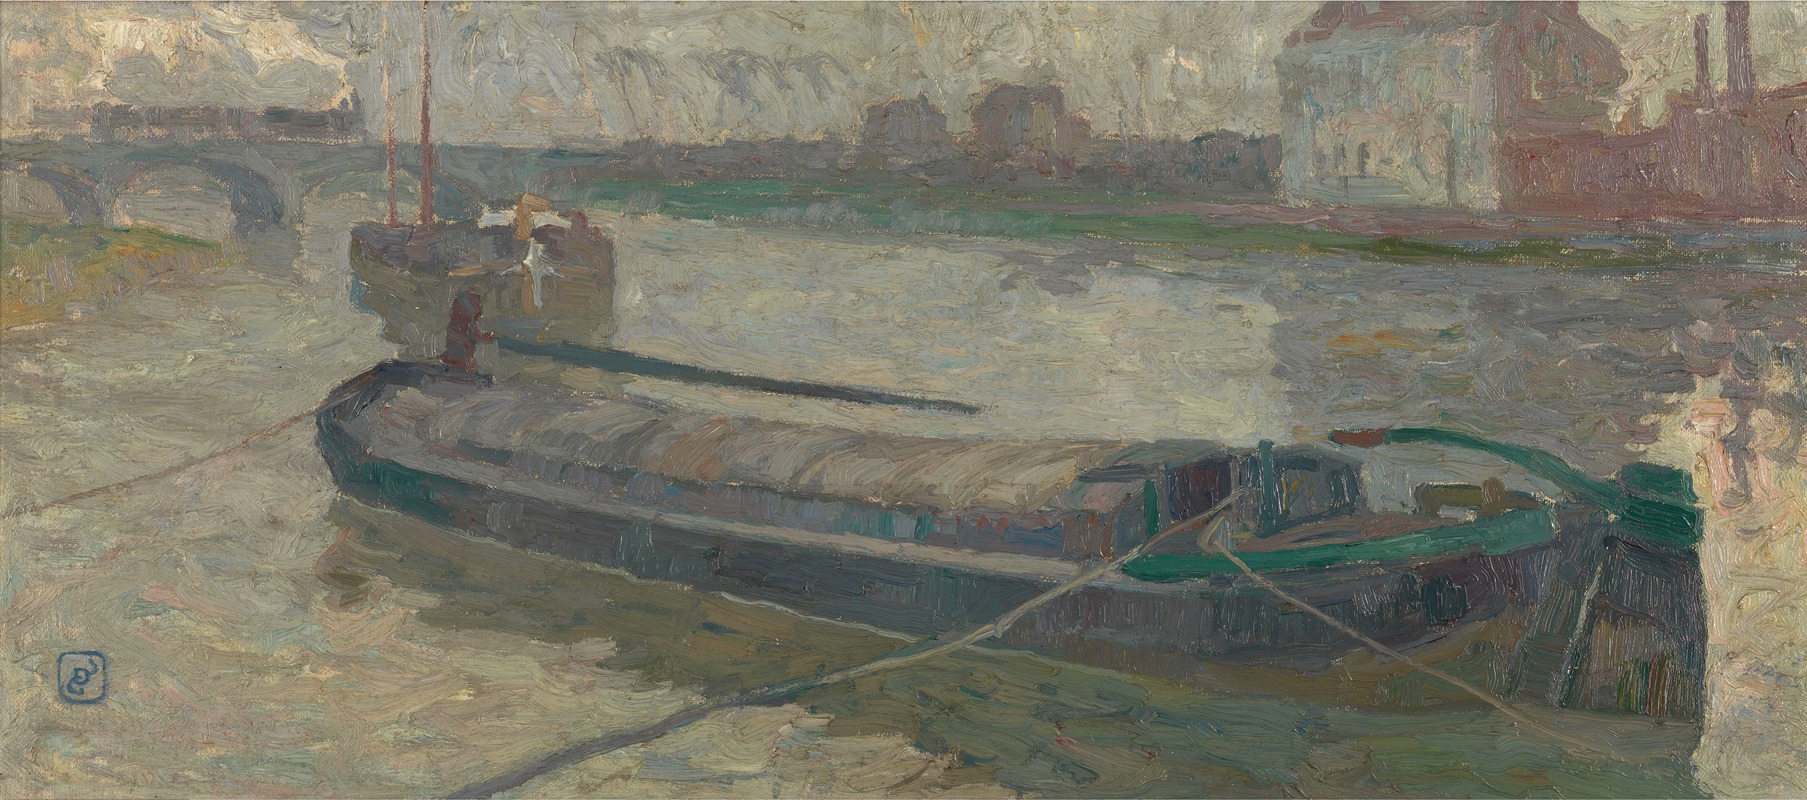 Gustave De Smet - View of the Stropbrug in Ghent